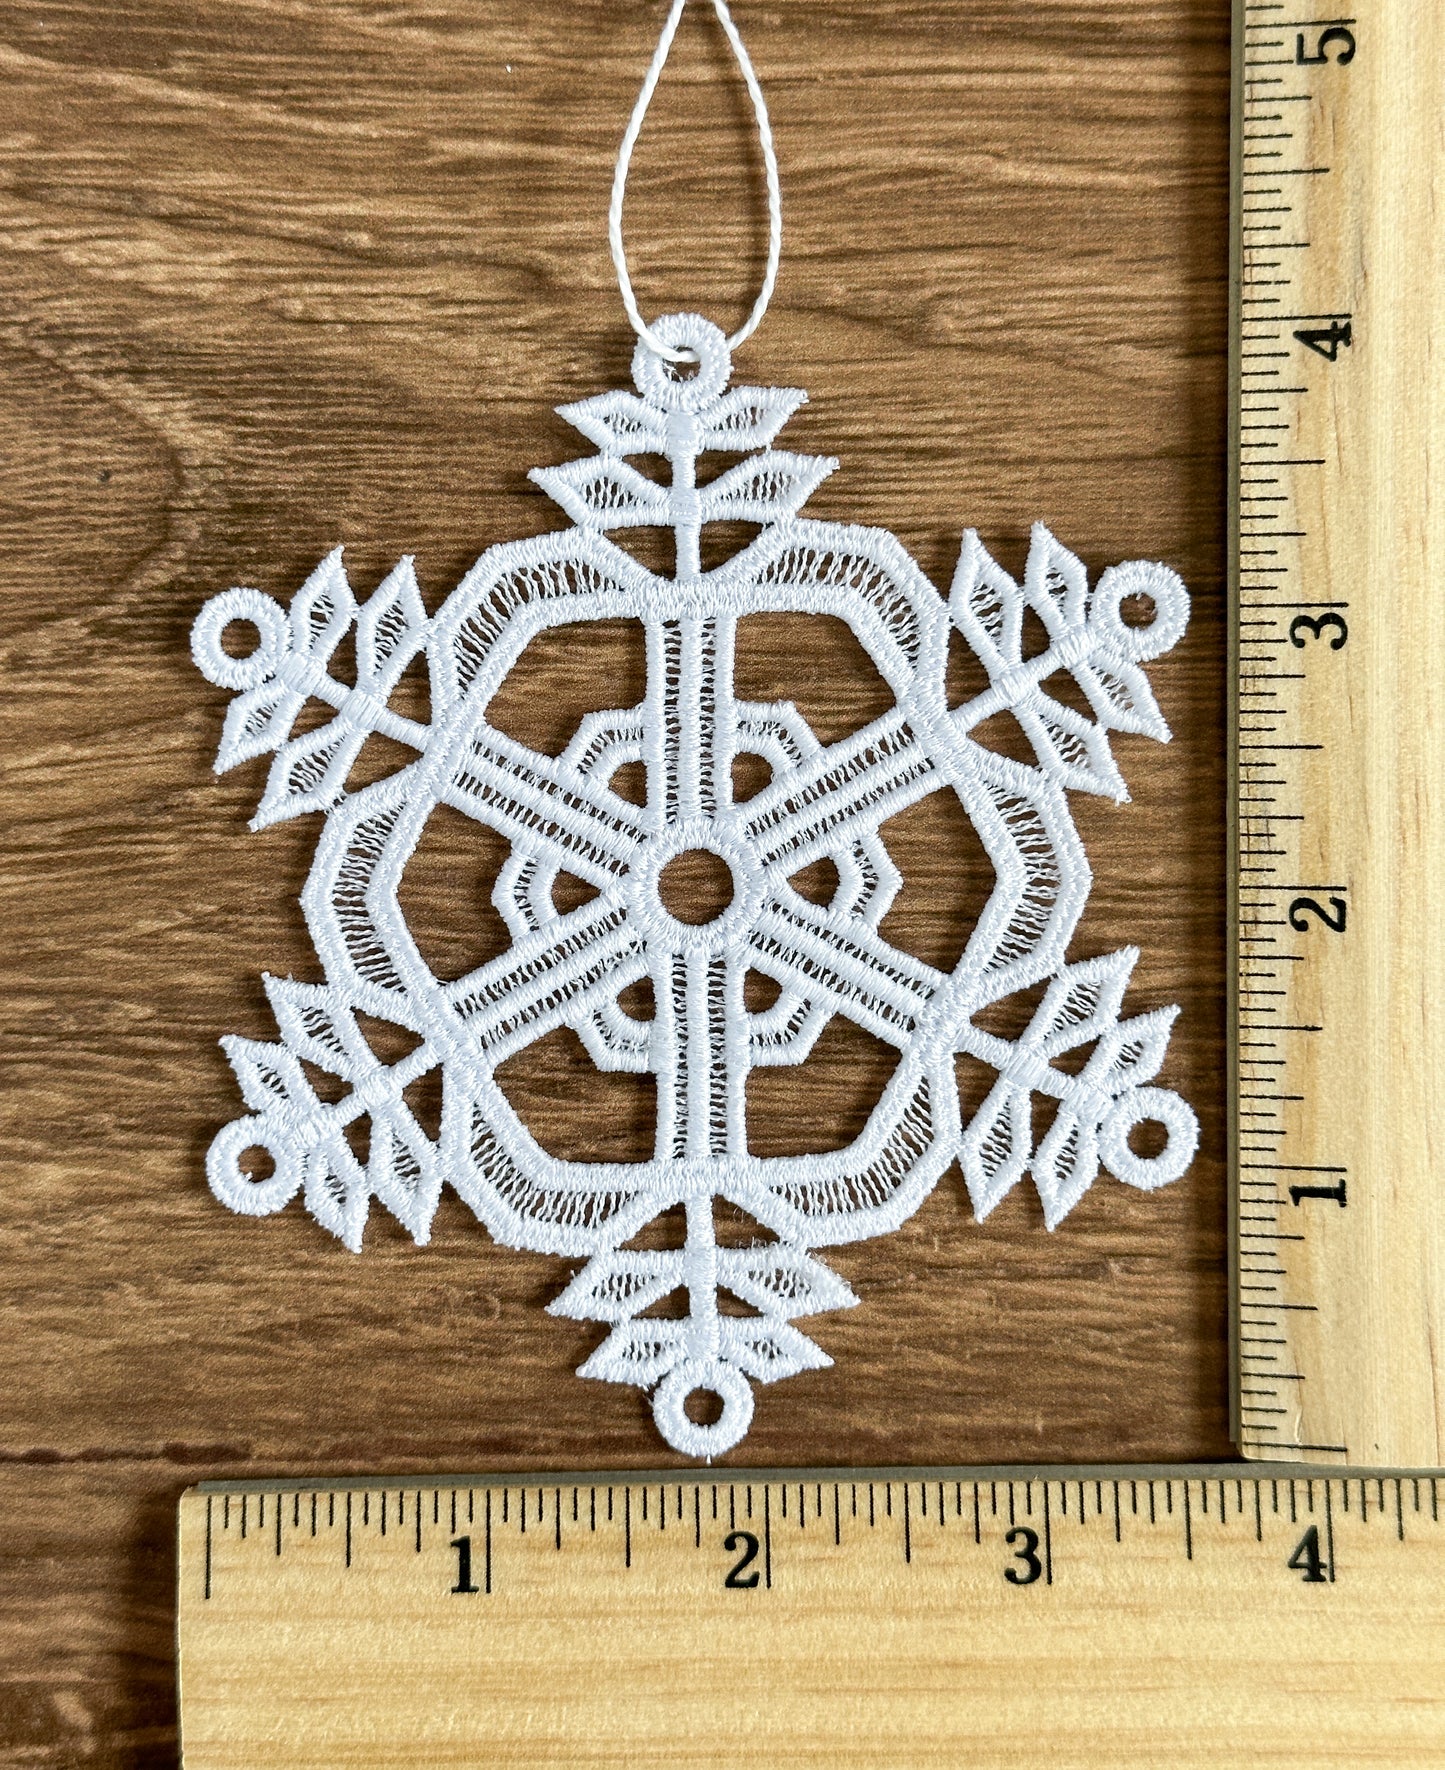 Embroidered Lace Snowflake Ornaments